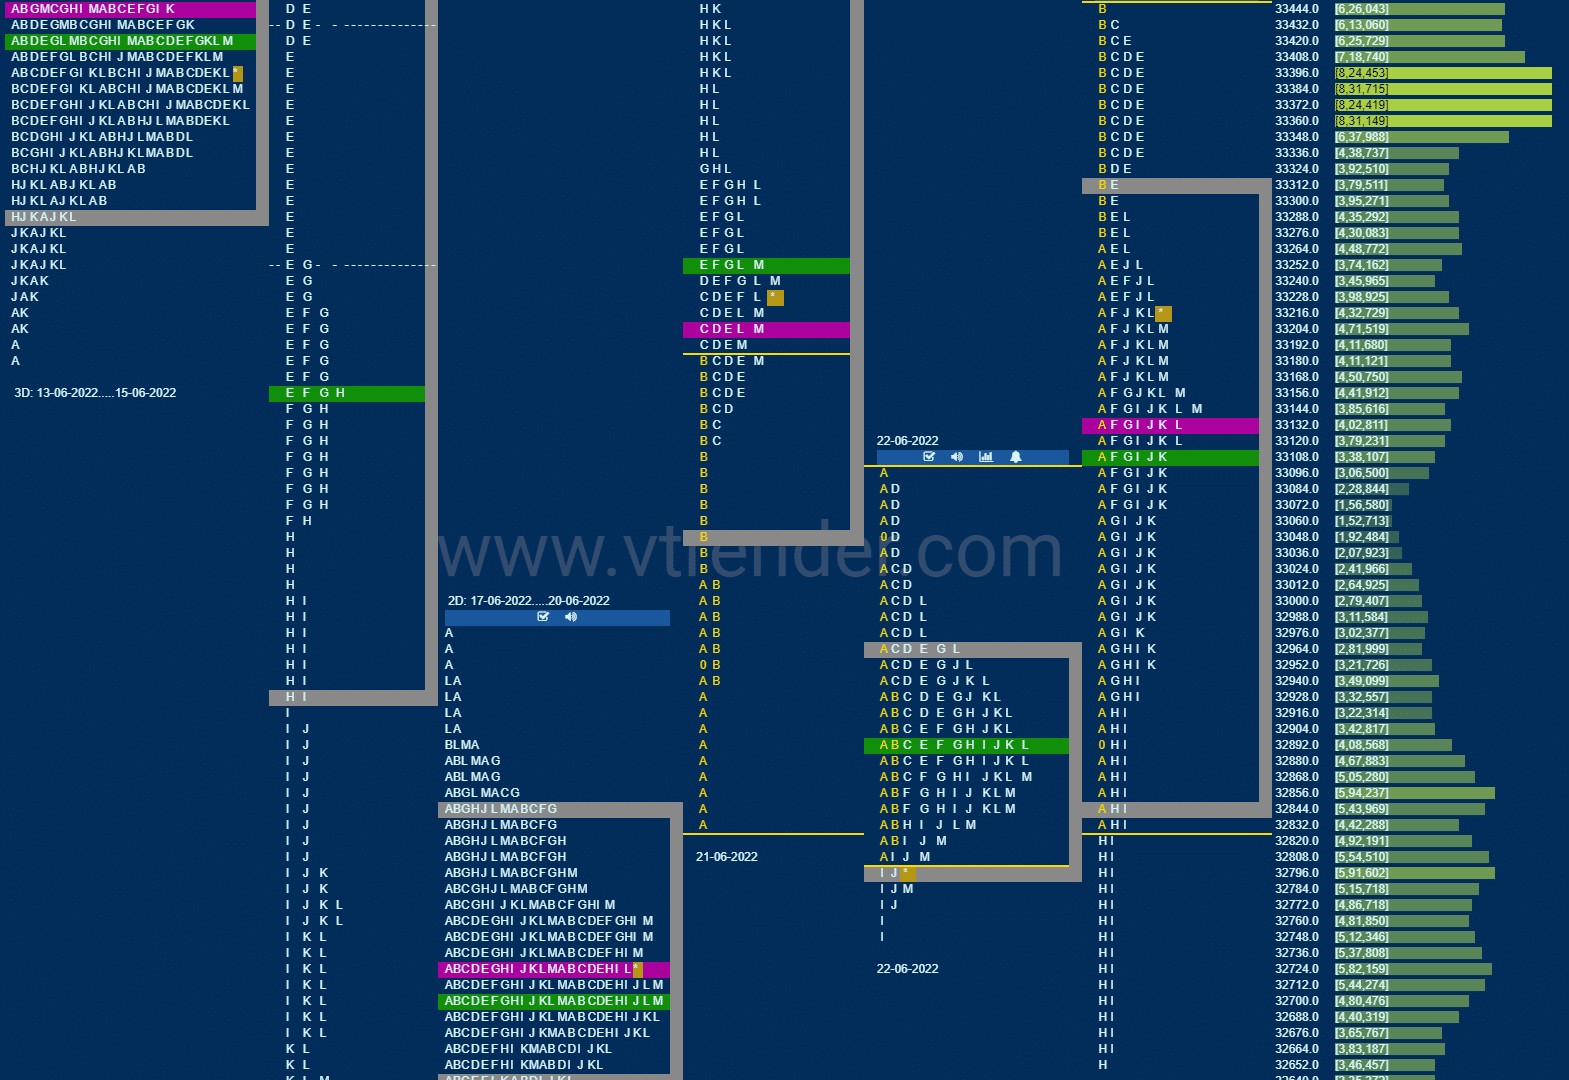 Bnf 17 Market Profile Analysis Dated 23Rd Jun 2022 Banknifty Futures, Charts, Day Trading, Intraday Trading, Intraday Trading Strategies, Market Profile, Market Profile Trading Strategies, Nifty Futures, Order Flow Analysis, Support And Resistance, Technical Analysis, Trading Strategies, Volume Profile Trading